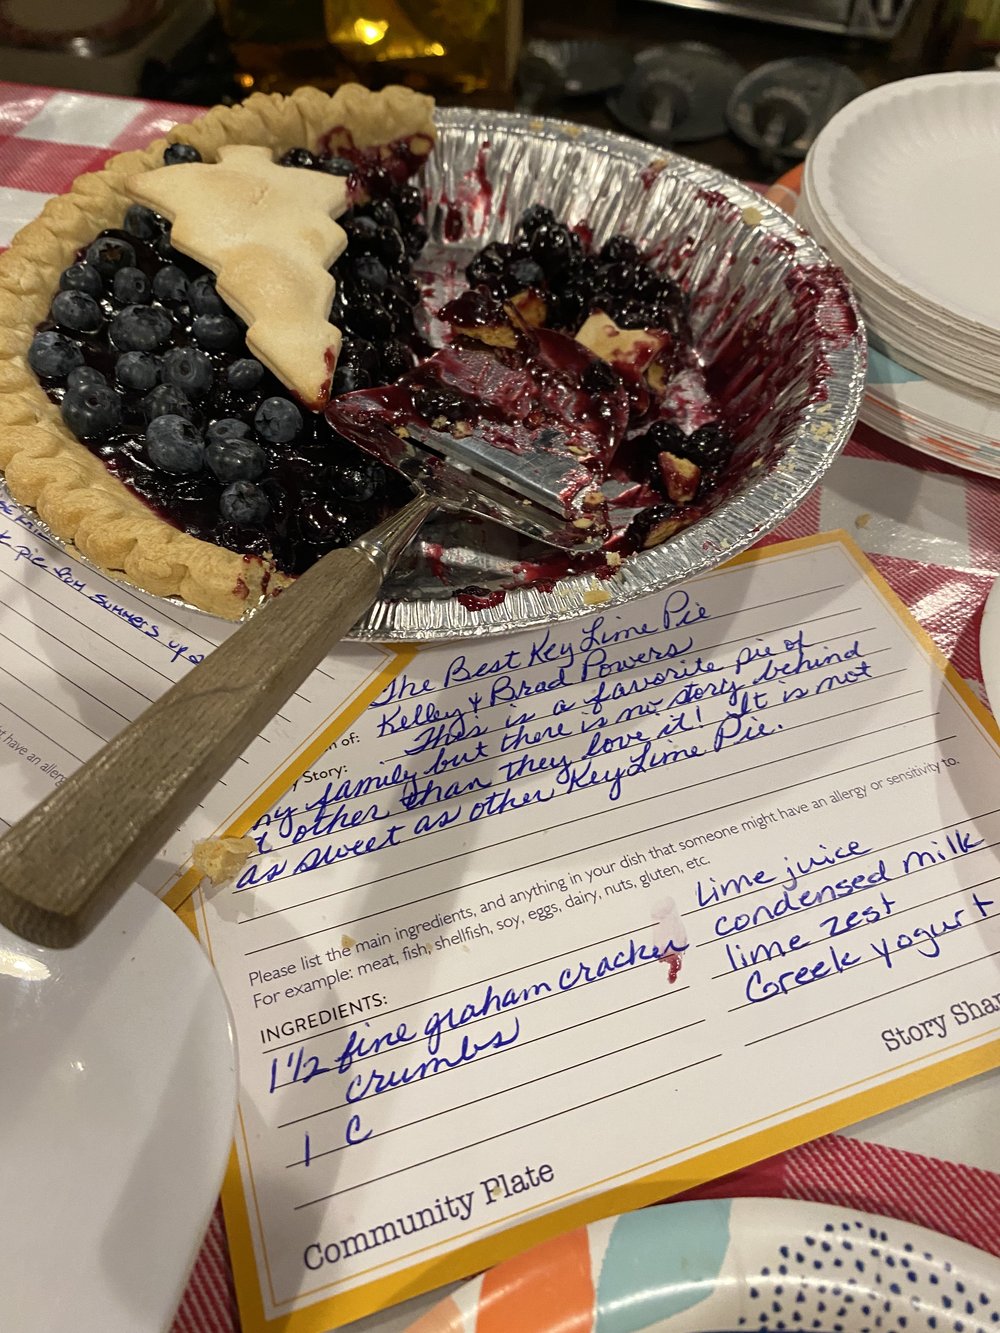 Each offering at Story Sharing Suppers is accompanied by a hand-written card giving the ingredients and the story behind the dish.